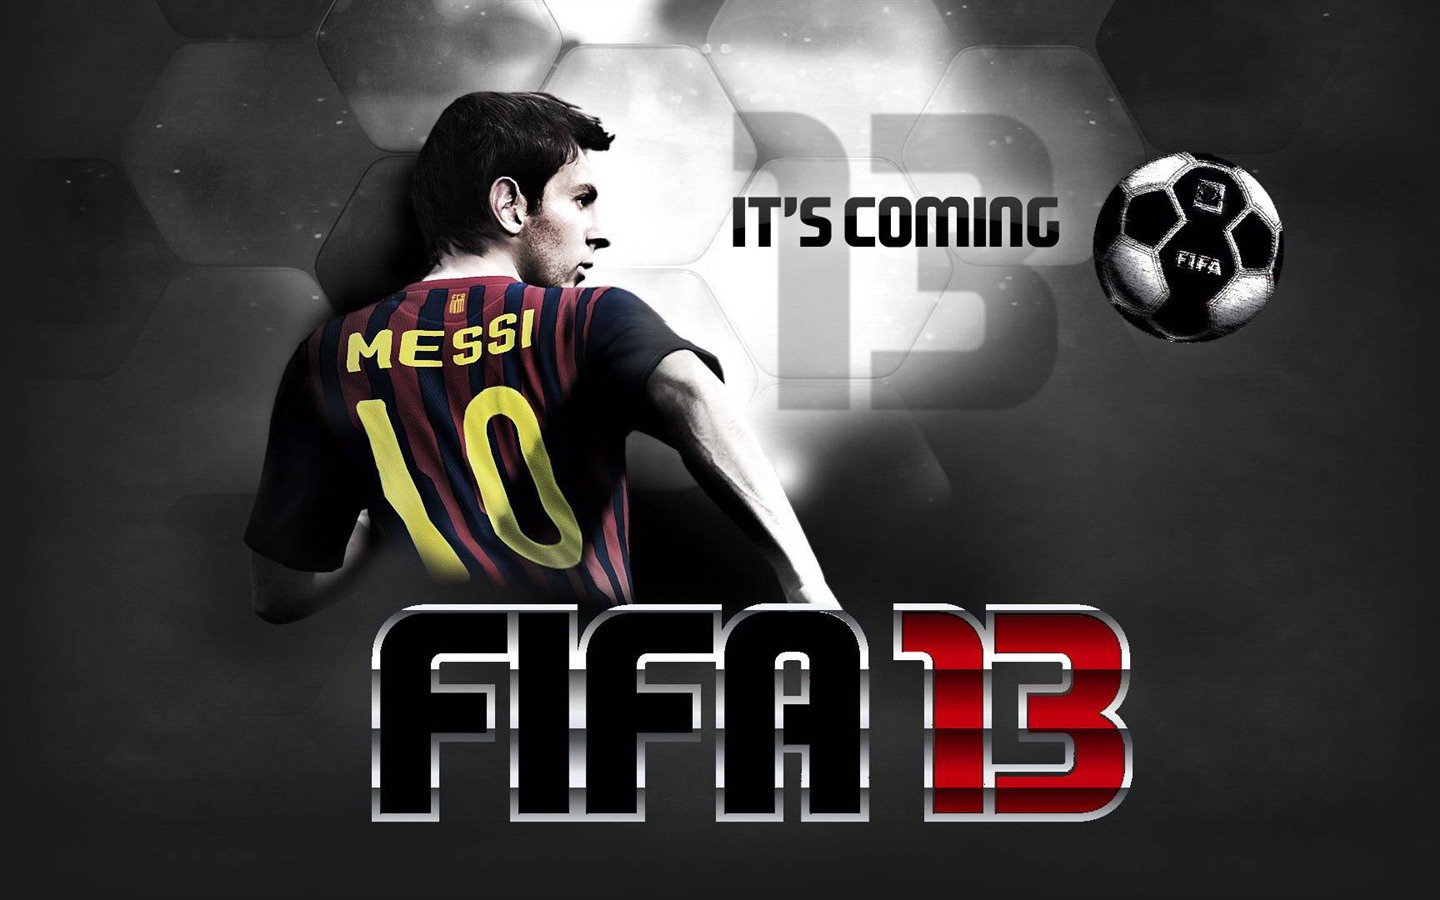 FIFA 13 game HD wallpapers #1 - 1440x900